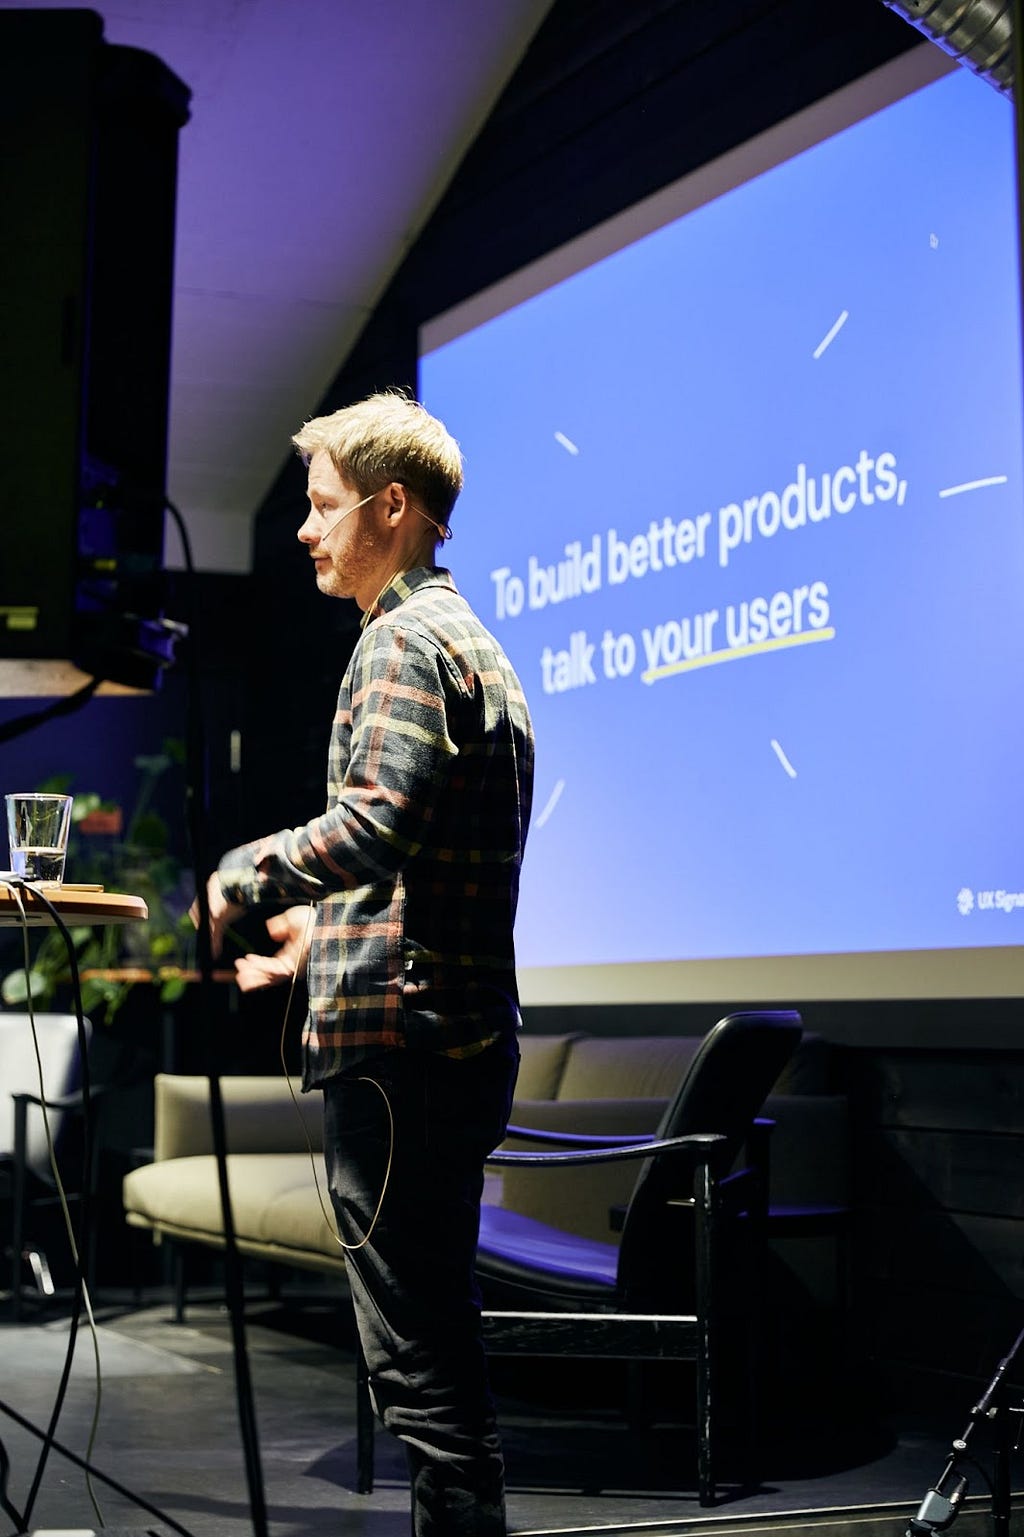 Kristian Berge presenterer UX signals. Slide: To build better products, talk to your users.